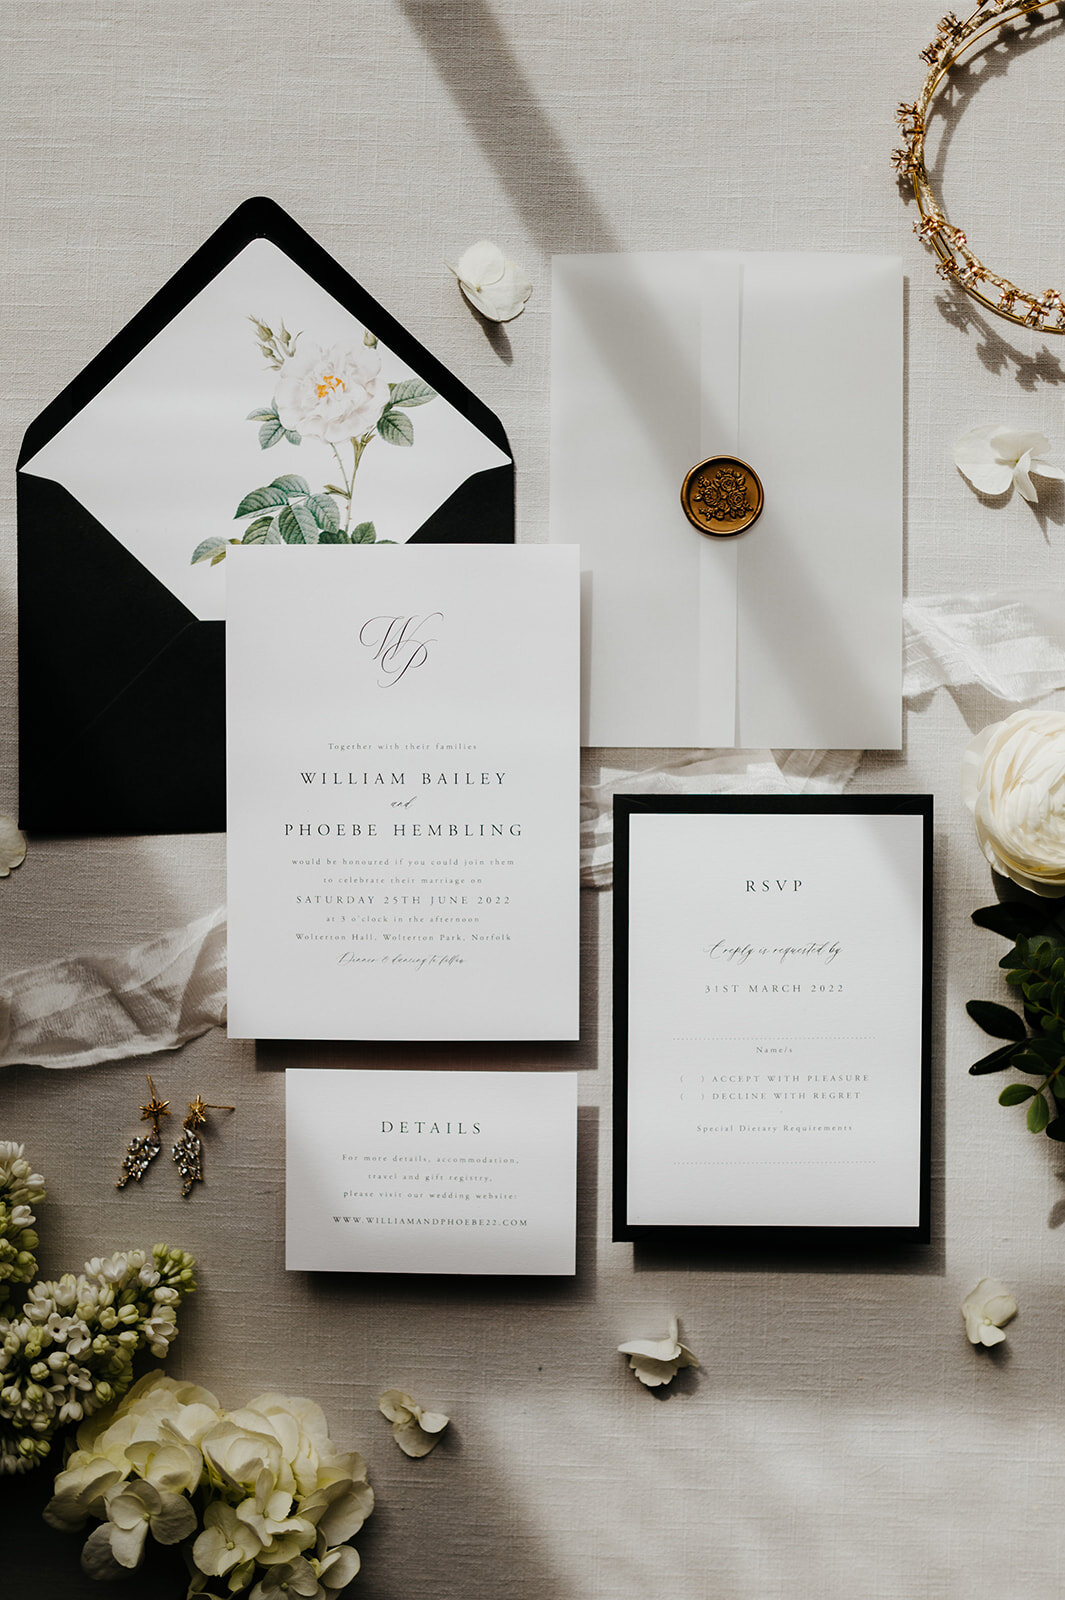 Getting married in 2024 and thinking about ordering your invitations?⁣
November is here already and we are getting ready for the 2024 season.  We have resisted as much as we can but our prices will be going up in January 2024. 

So NOW is the perfect